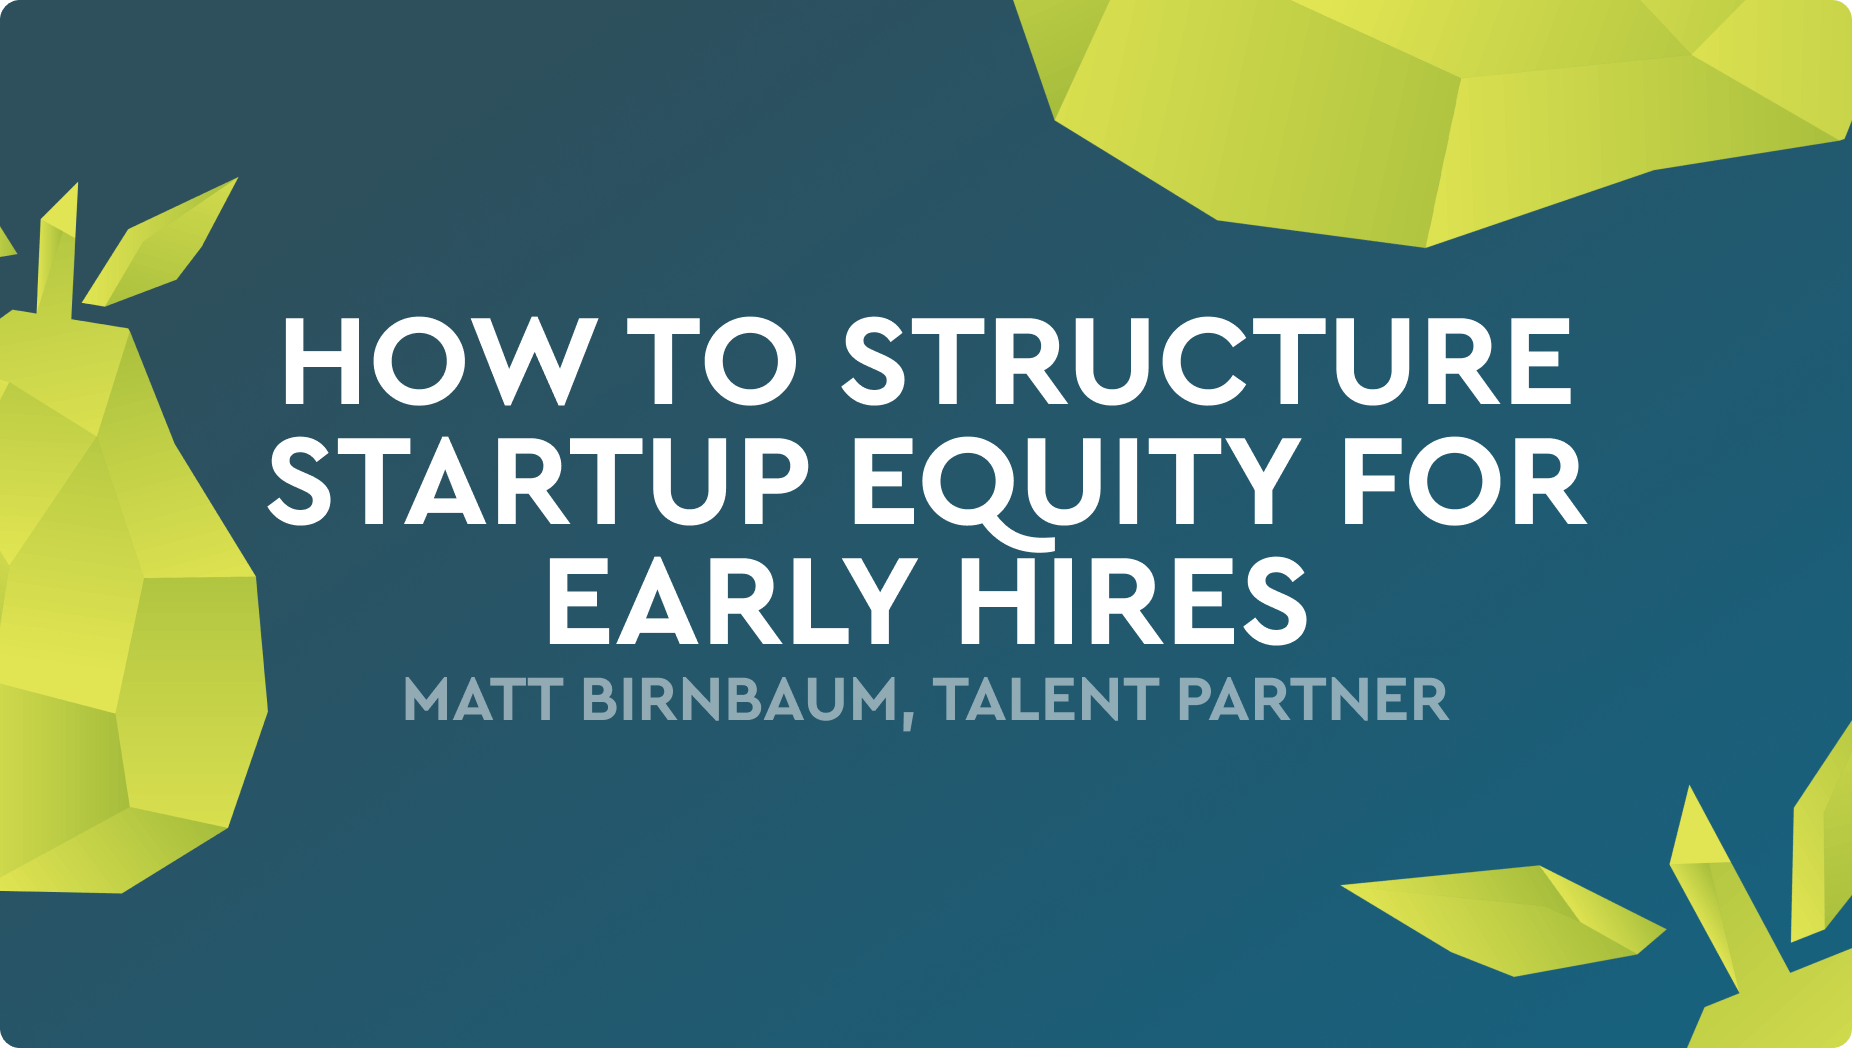 How to structure startup equity for early hires